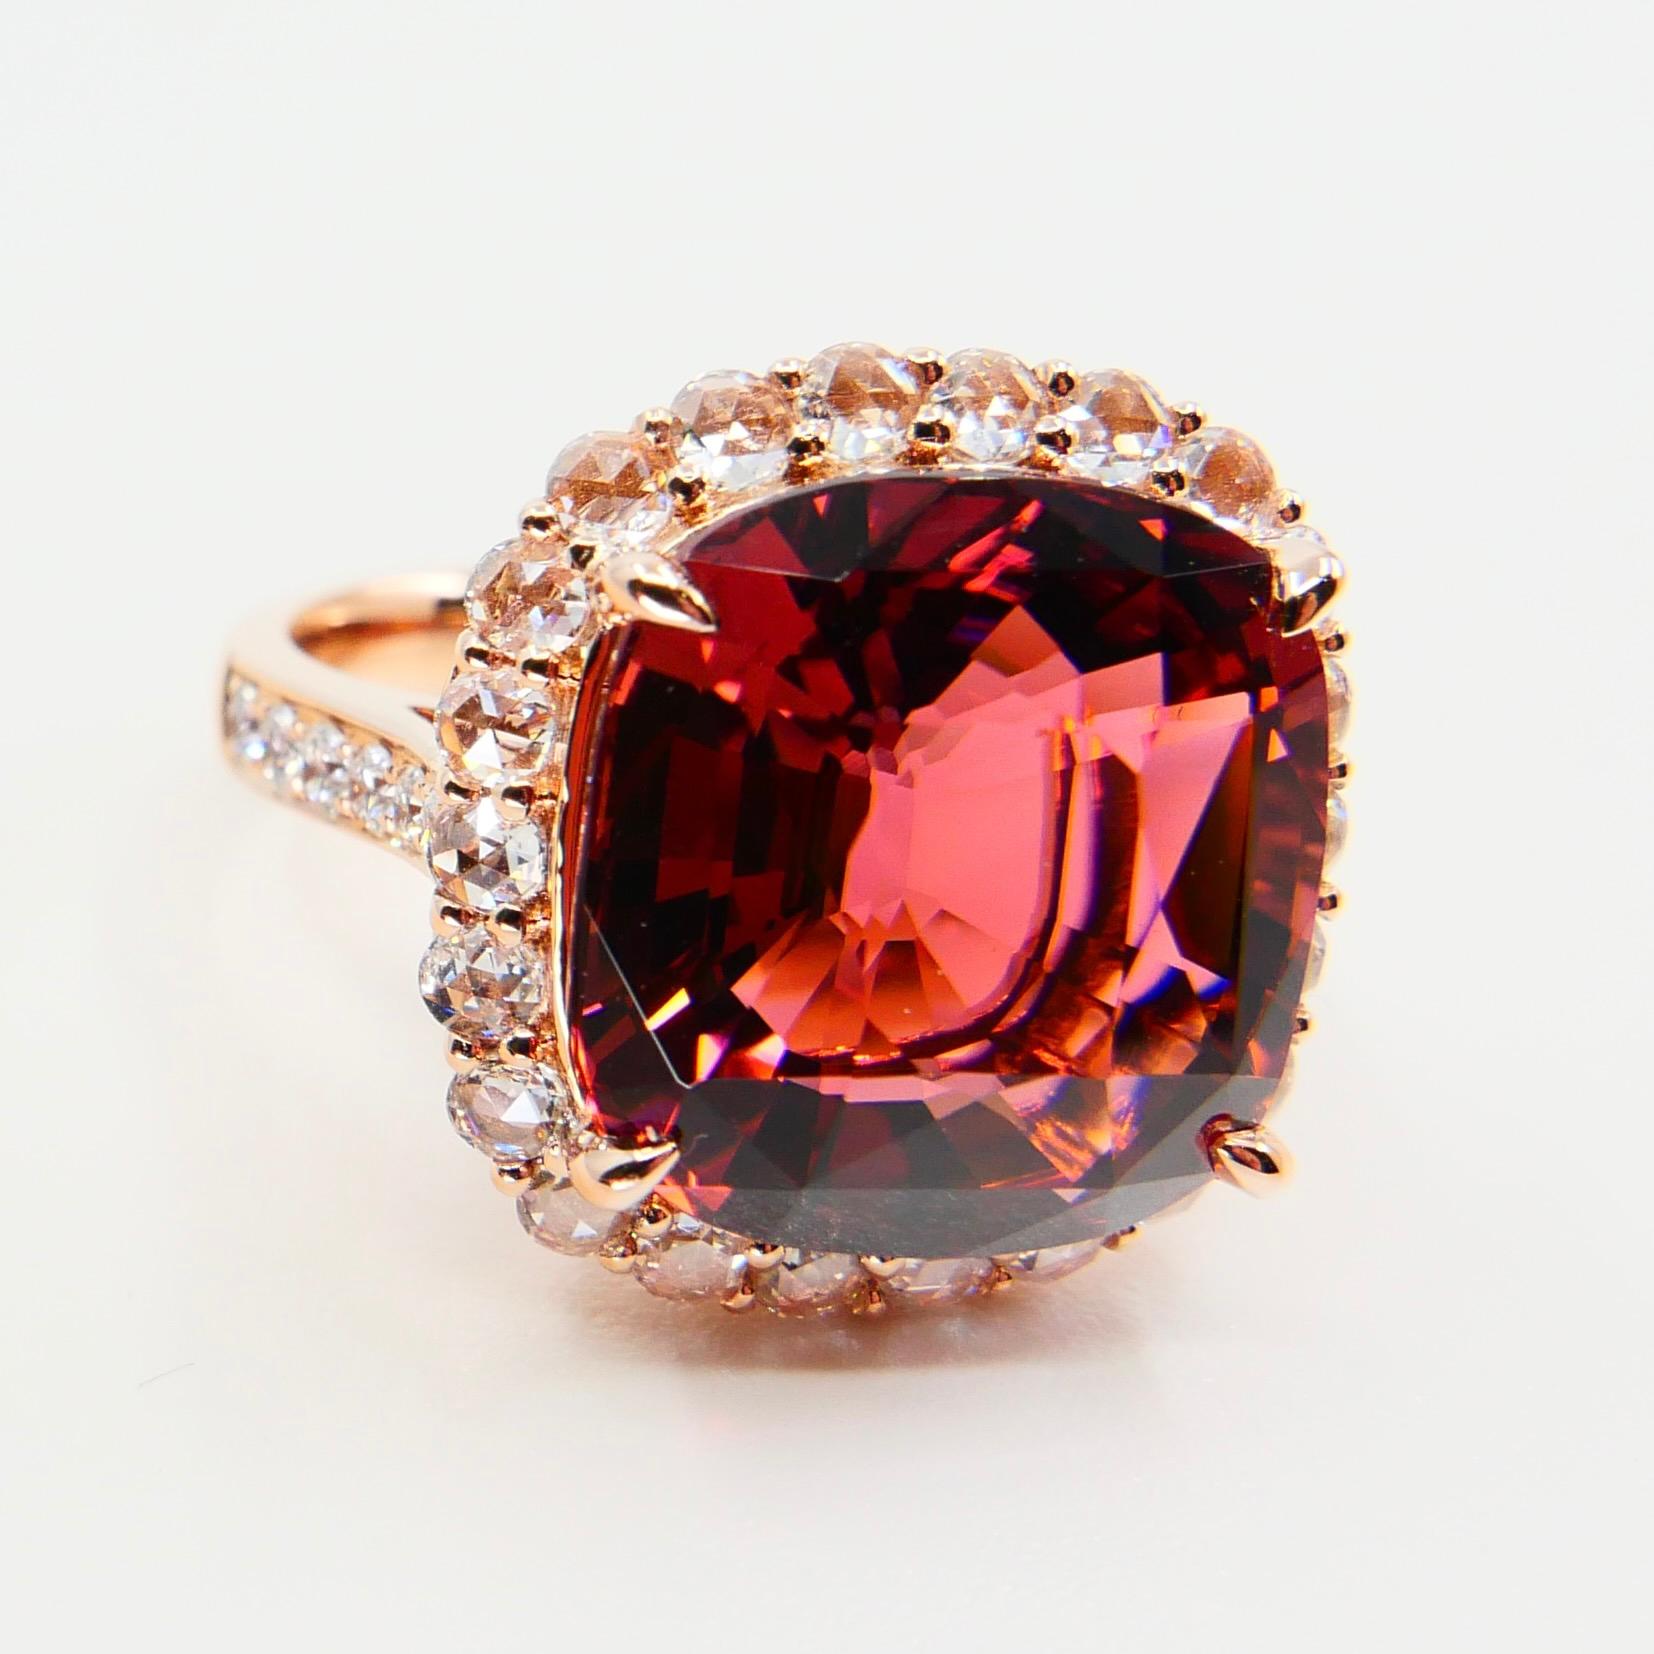 GIA Certified 11.55 Cts Orange Pink Tourmaline & Rose Cut Diamond Cocktail Ring For Sale 6